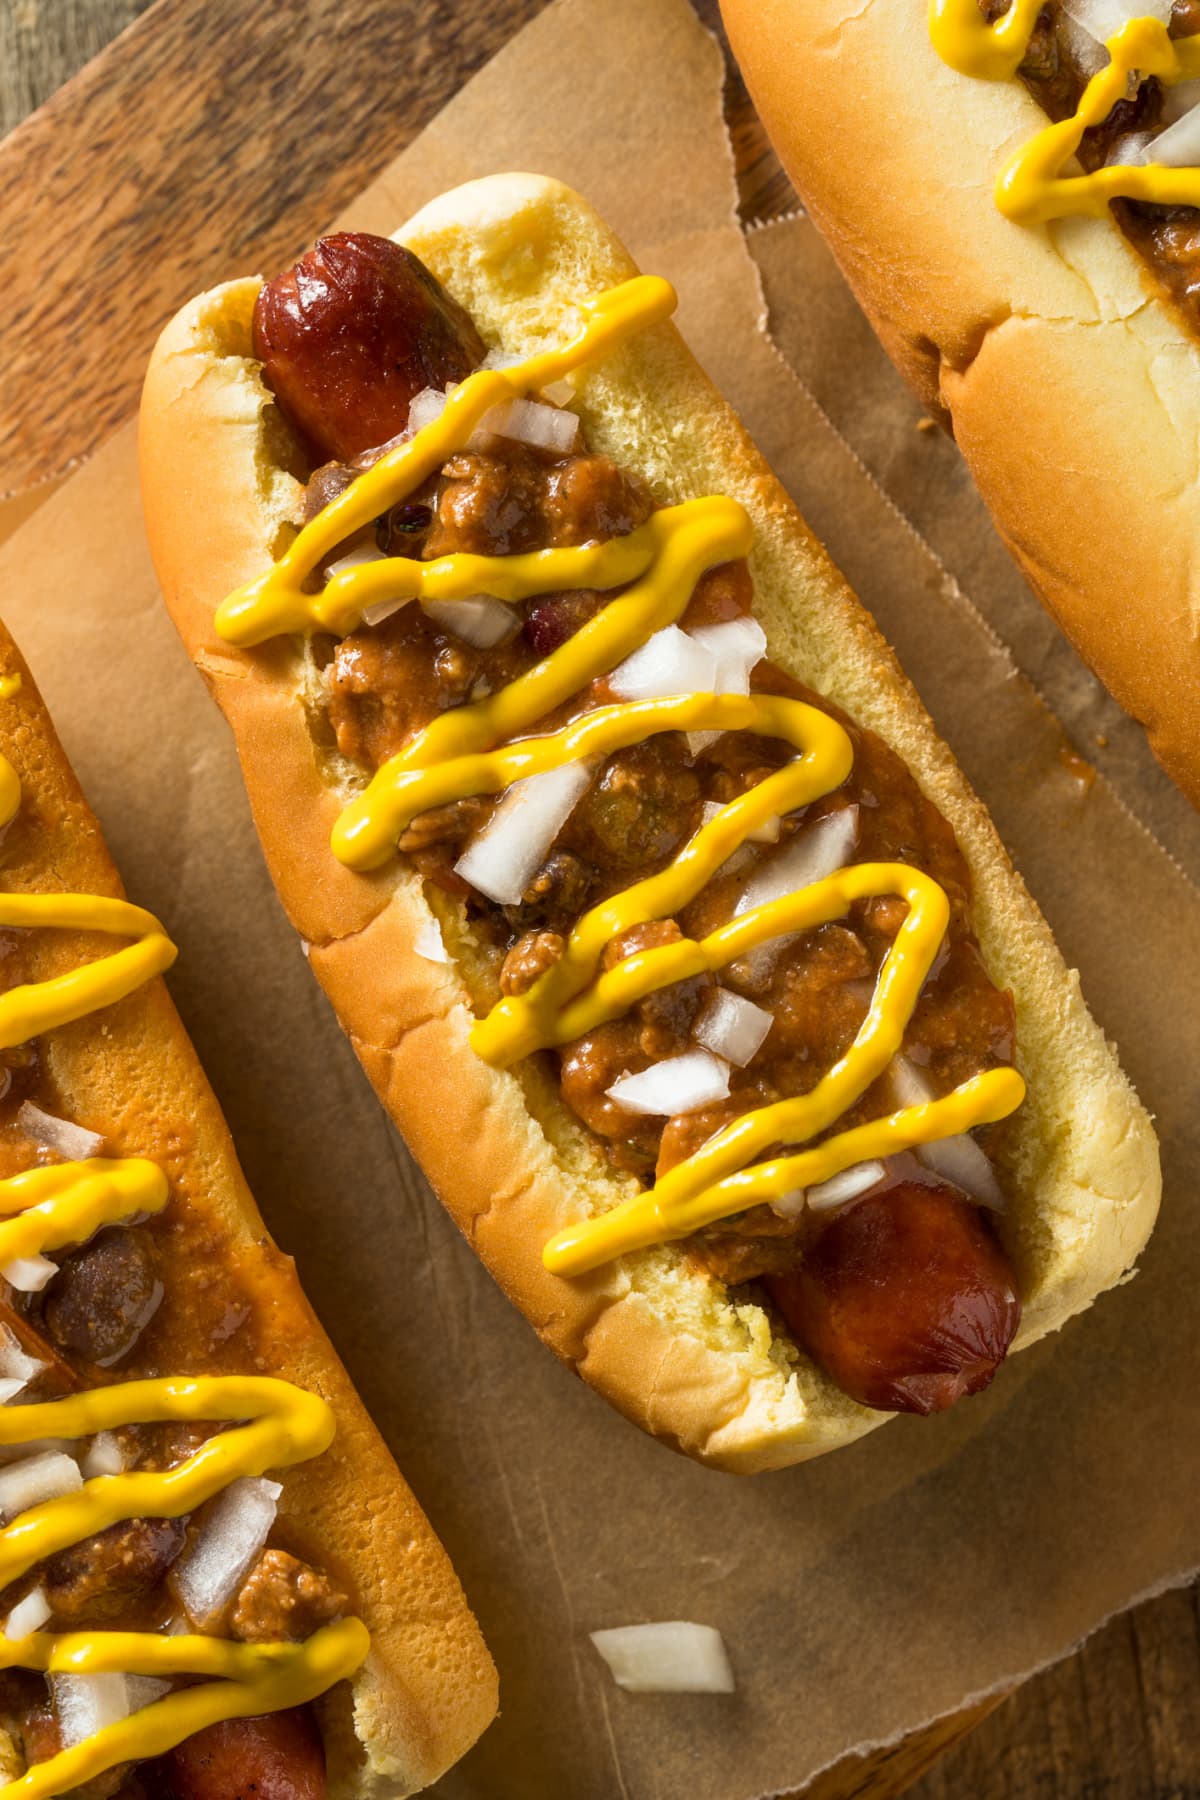 Homemade Detroit style chili dog with mustard and onion